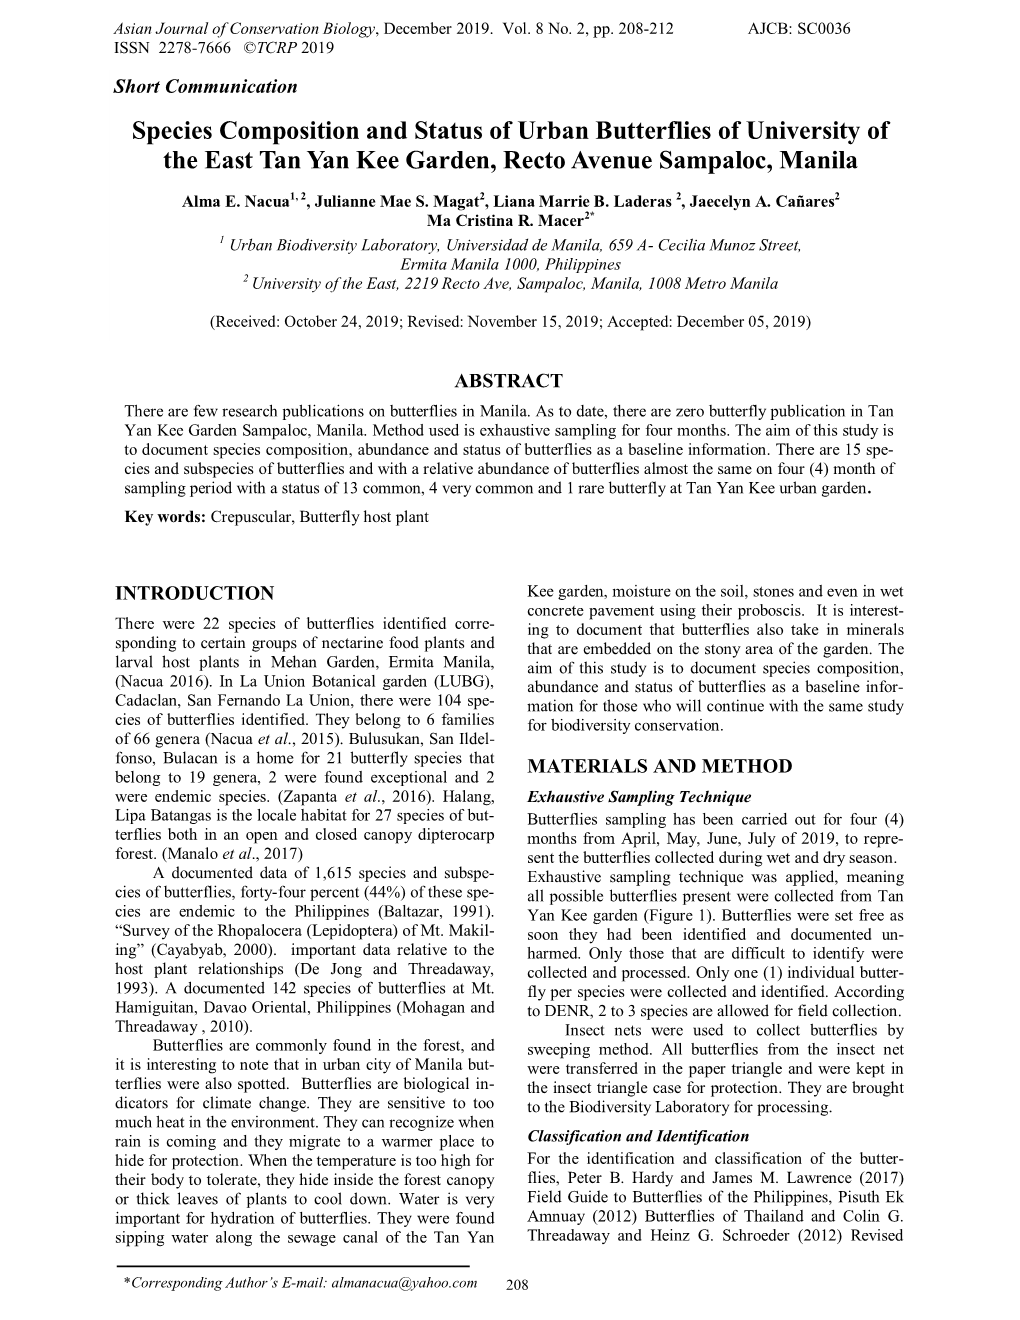 Species Composition and Status of Urban Butterflies of University of the East Tan Yan Kee Garden, Recto Avenue Sampaloc, Manila